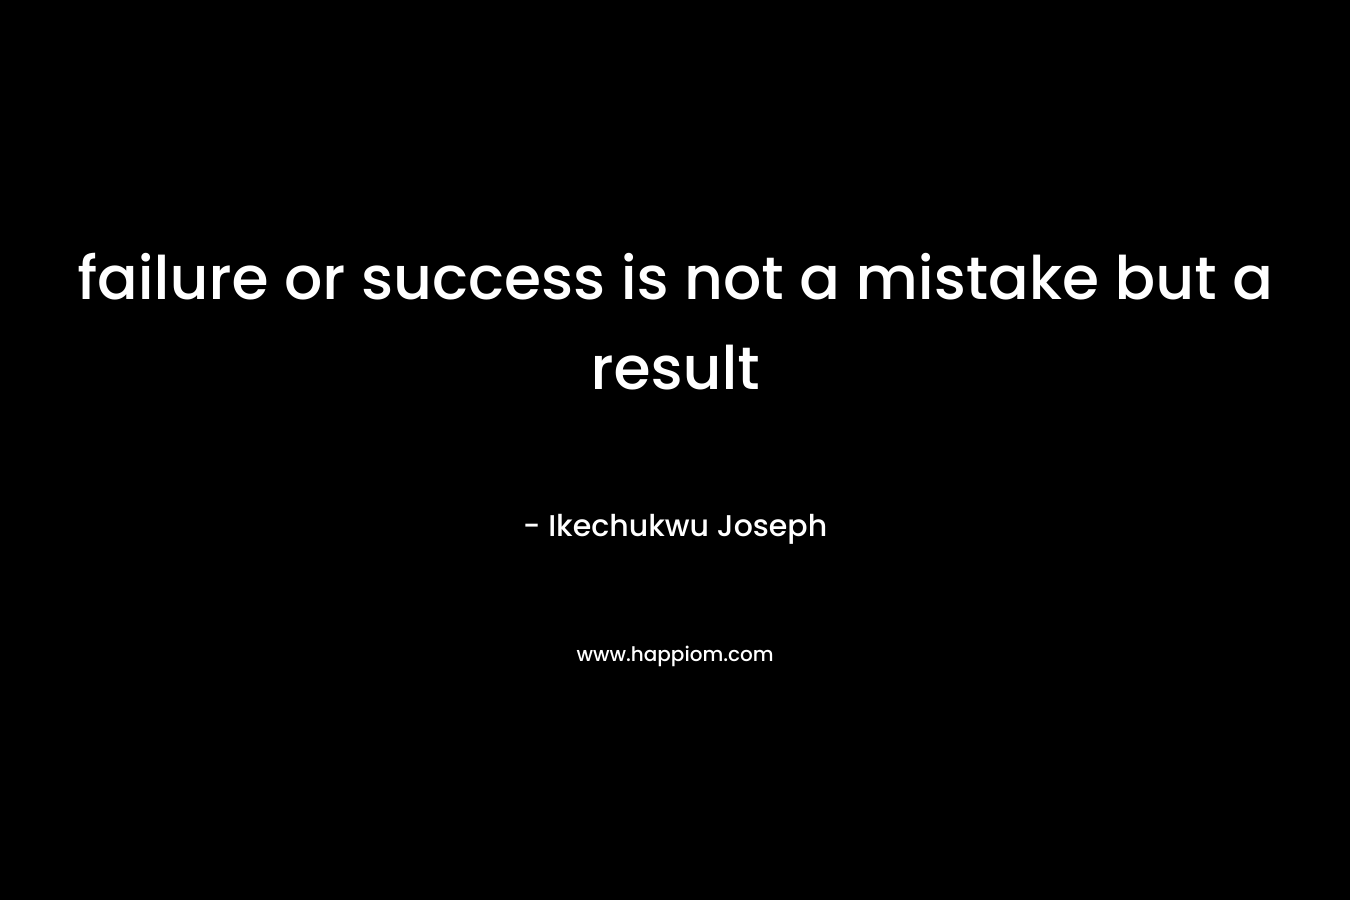 failure or success is not a mistake but a result